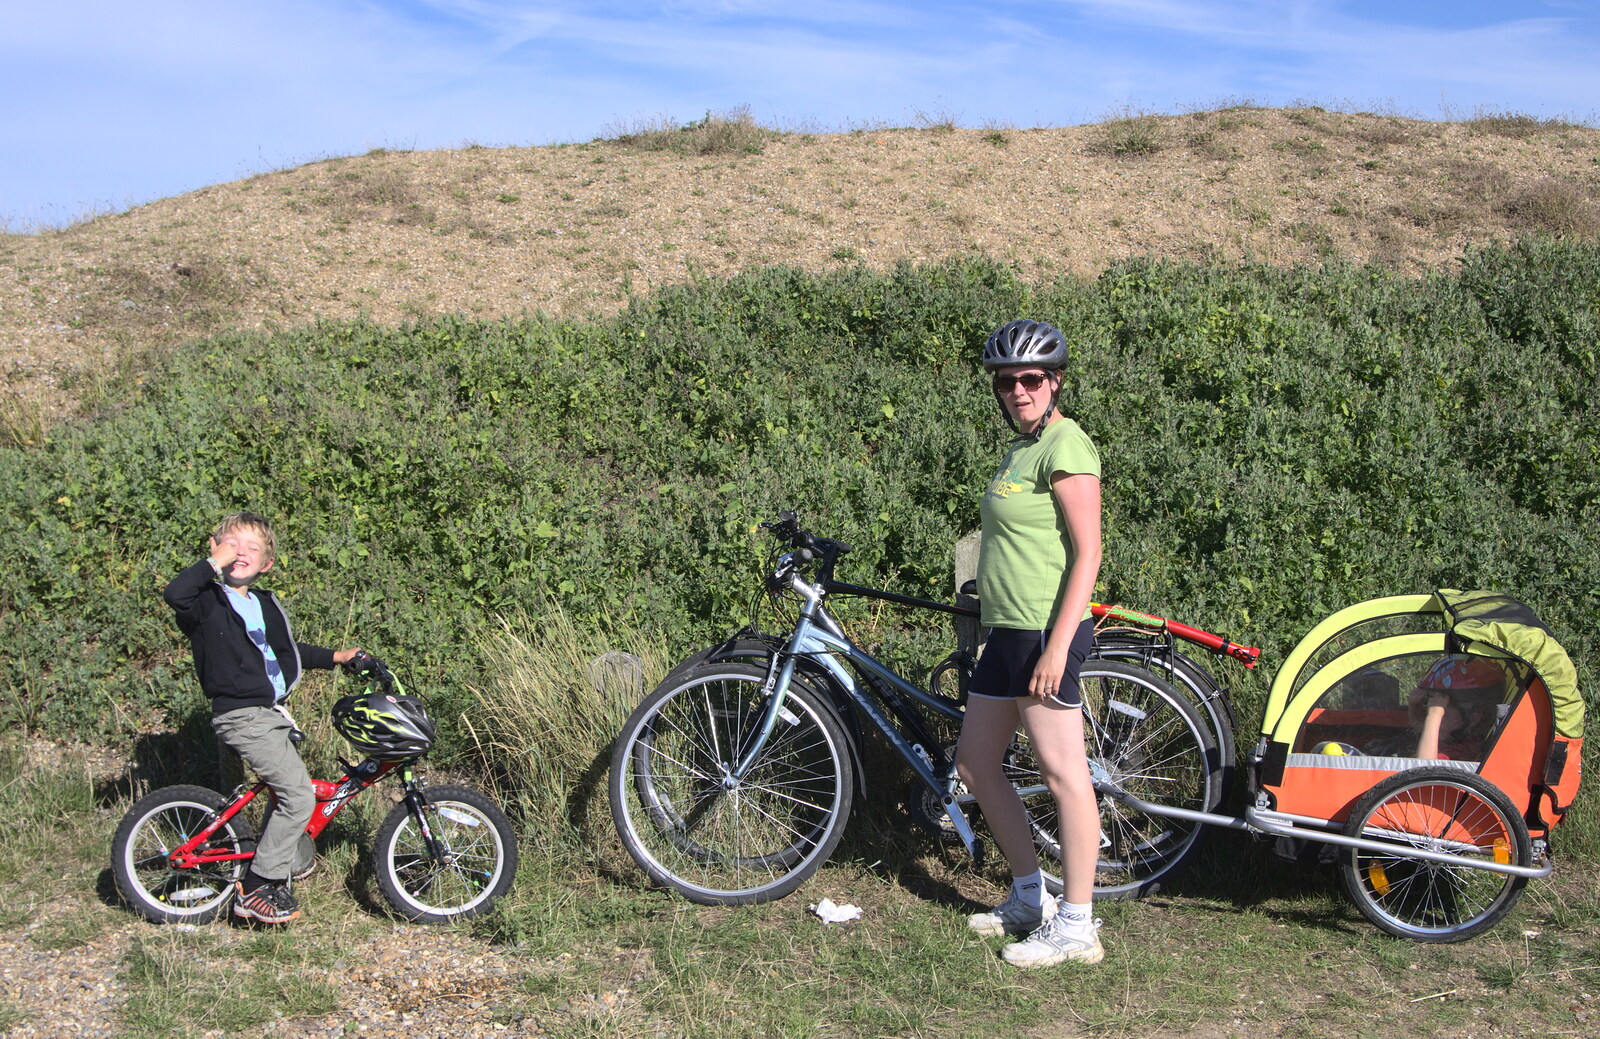 Fred and Isobel by the bikes from The Archaeology of Dunwich: A Camping Trip, Dunwich, Suffolk - 1st August 2015